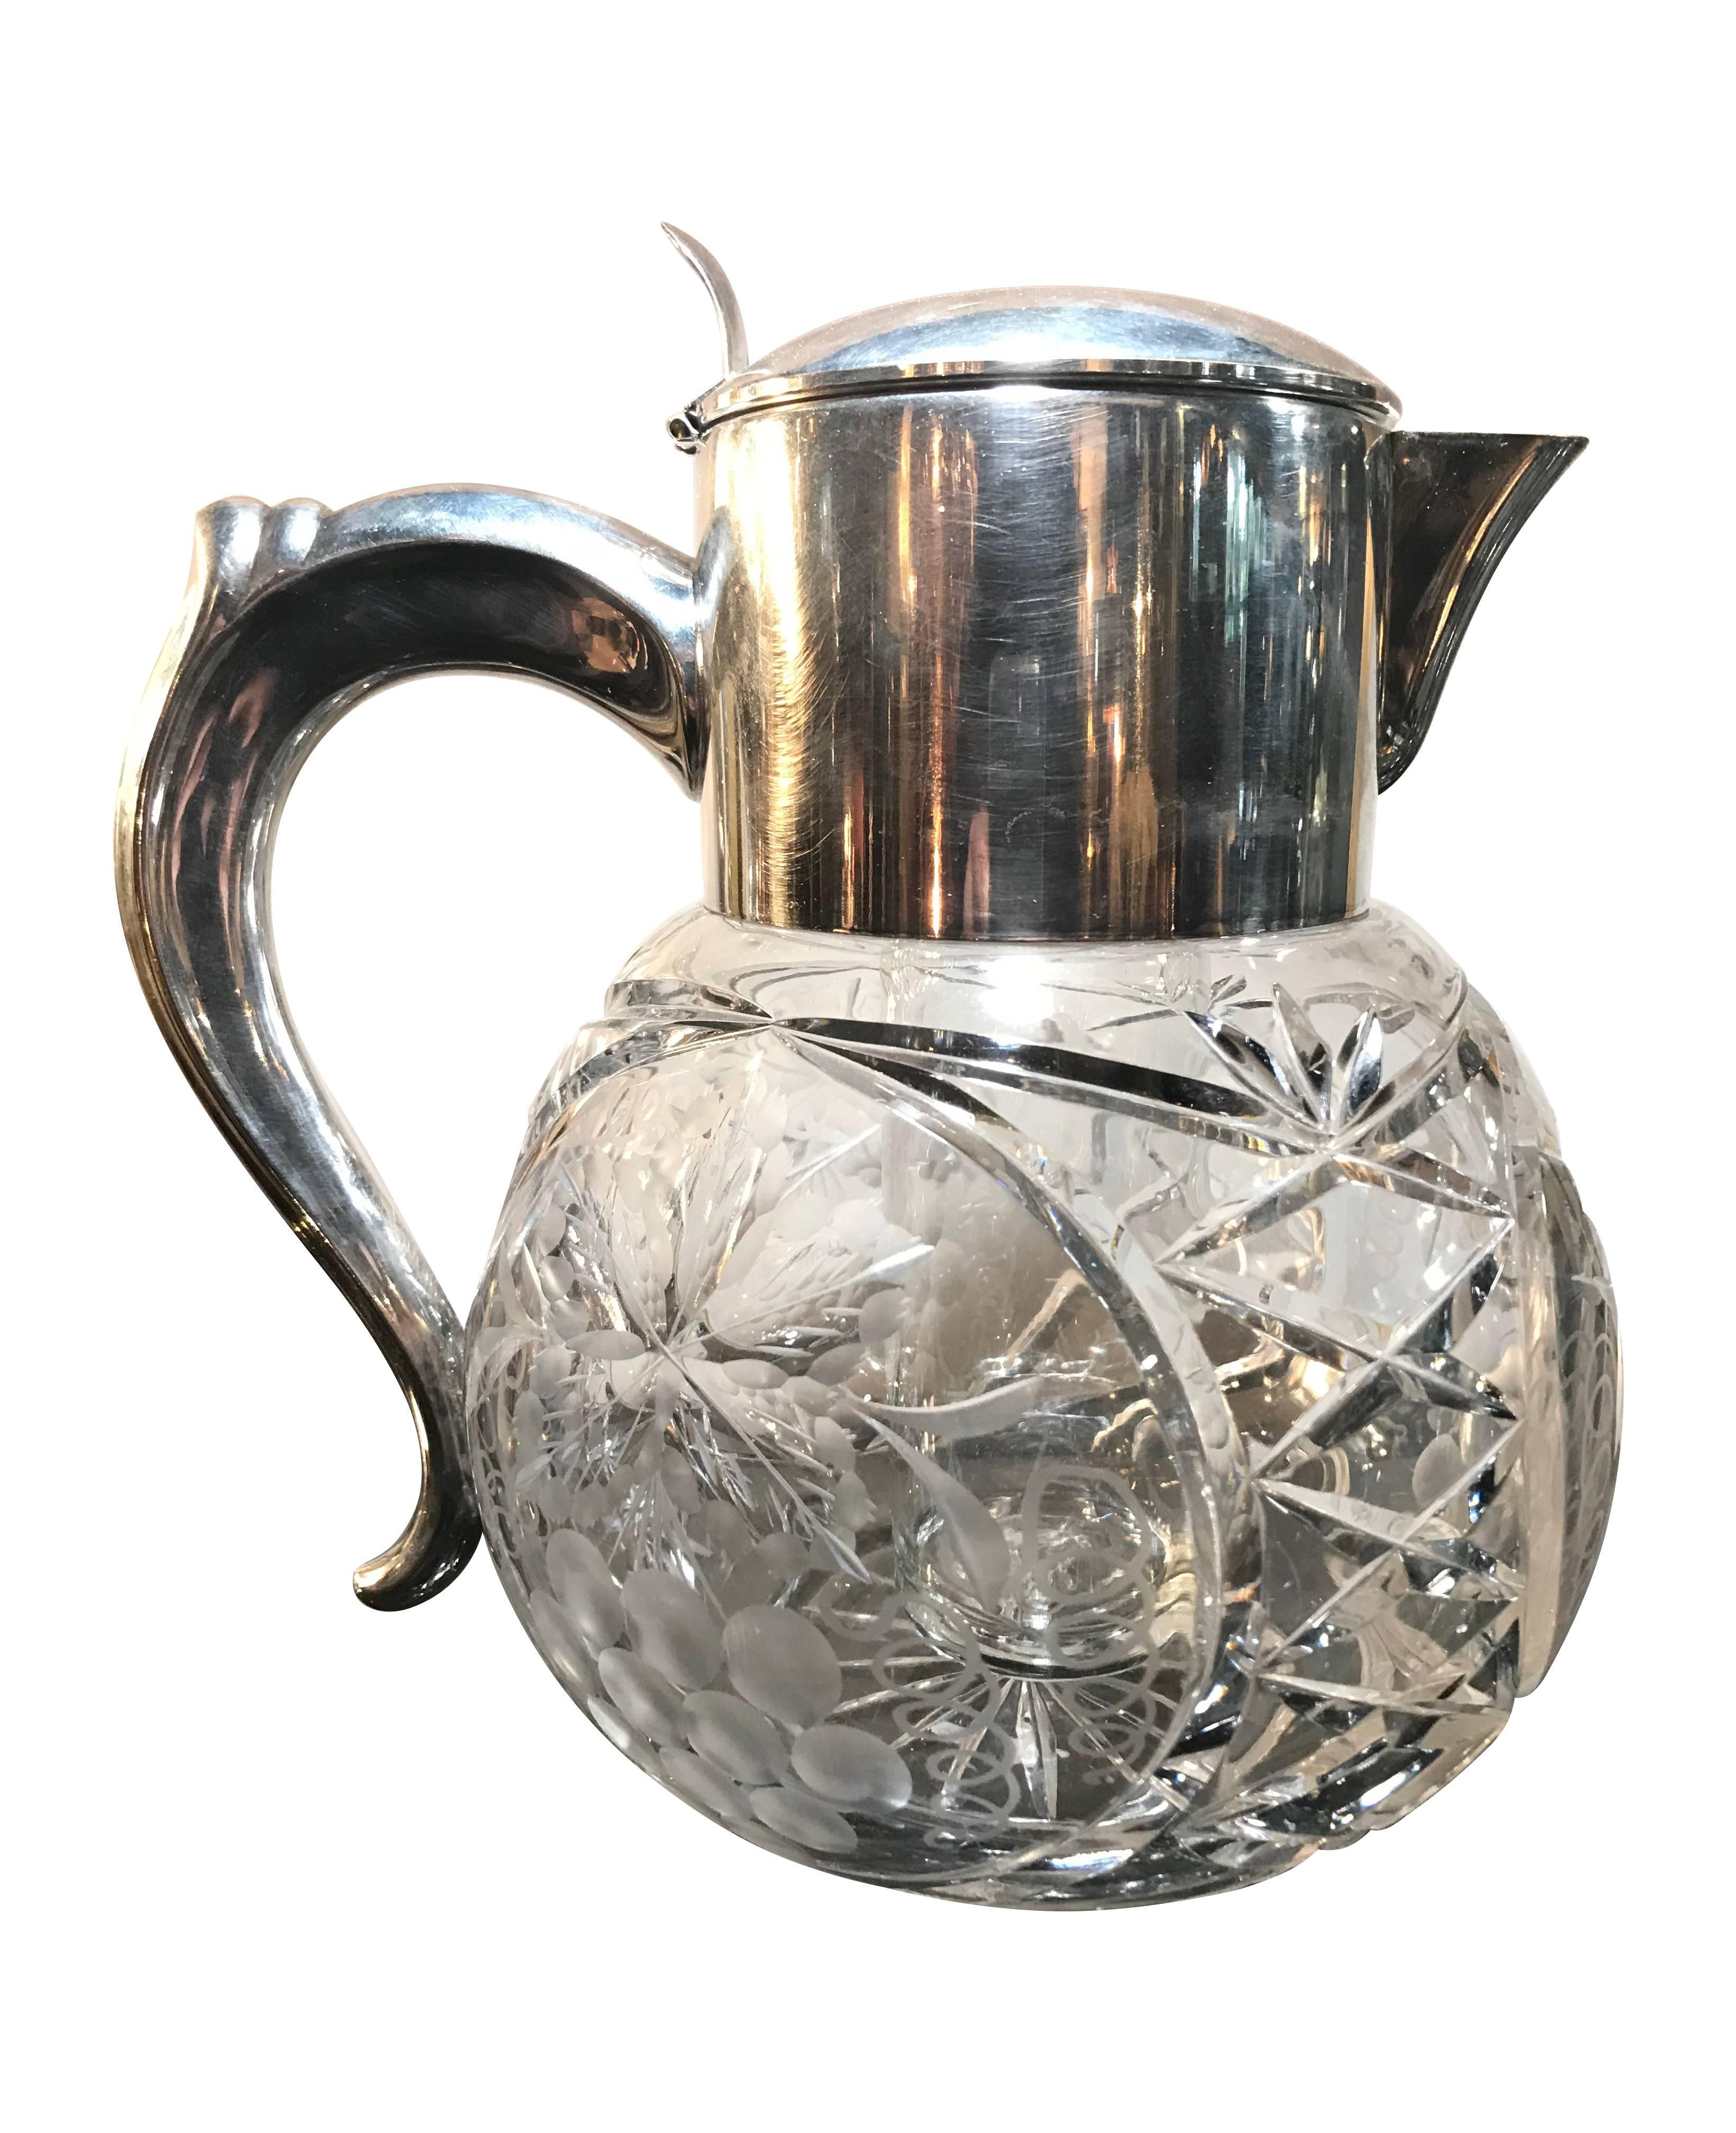 A beautiful cut-glass lemonade or cocktail jug, decorated with grapes and leaves, with hall marked silver plated handle and hinged lid, that opens to remove glass ice compartment that chills, but doesn't dilute the drink. Beautiful quality piece